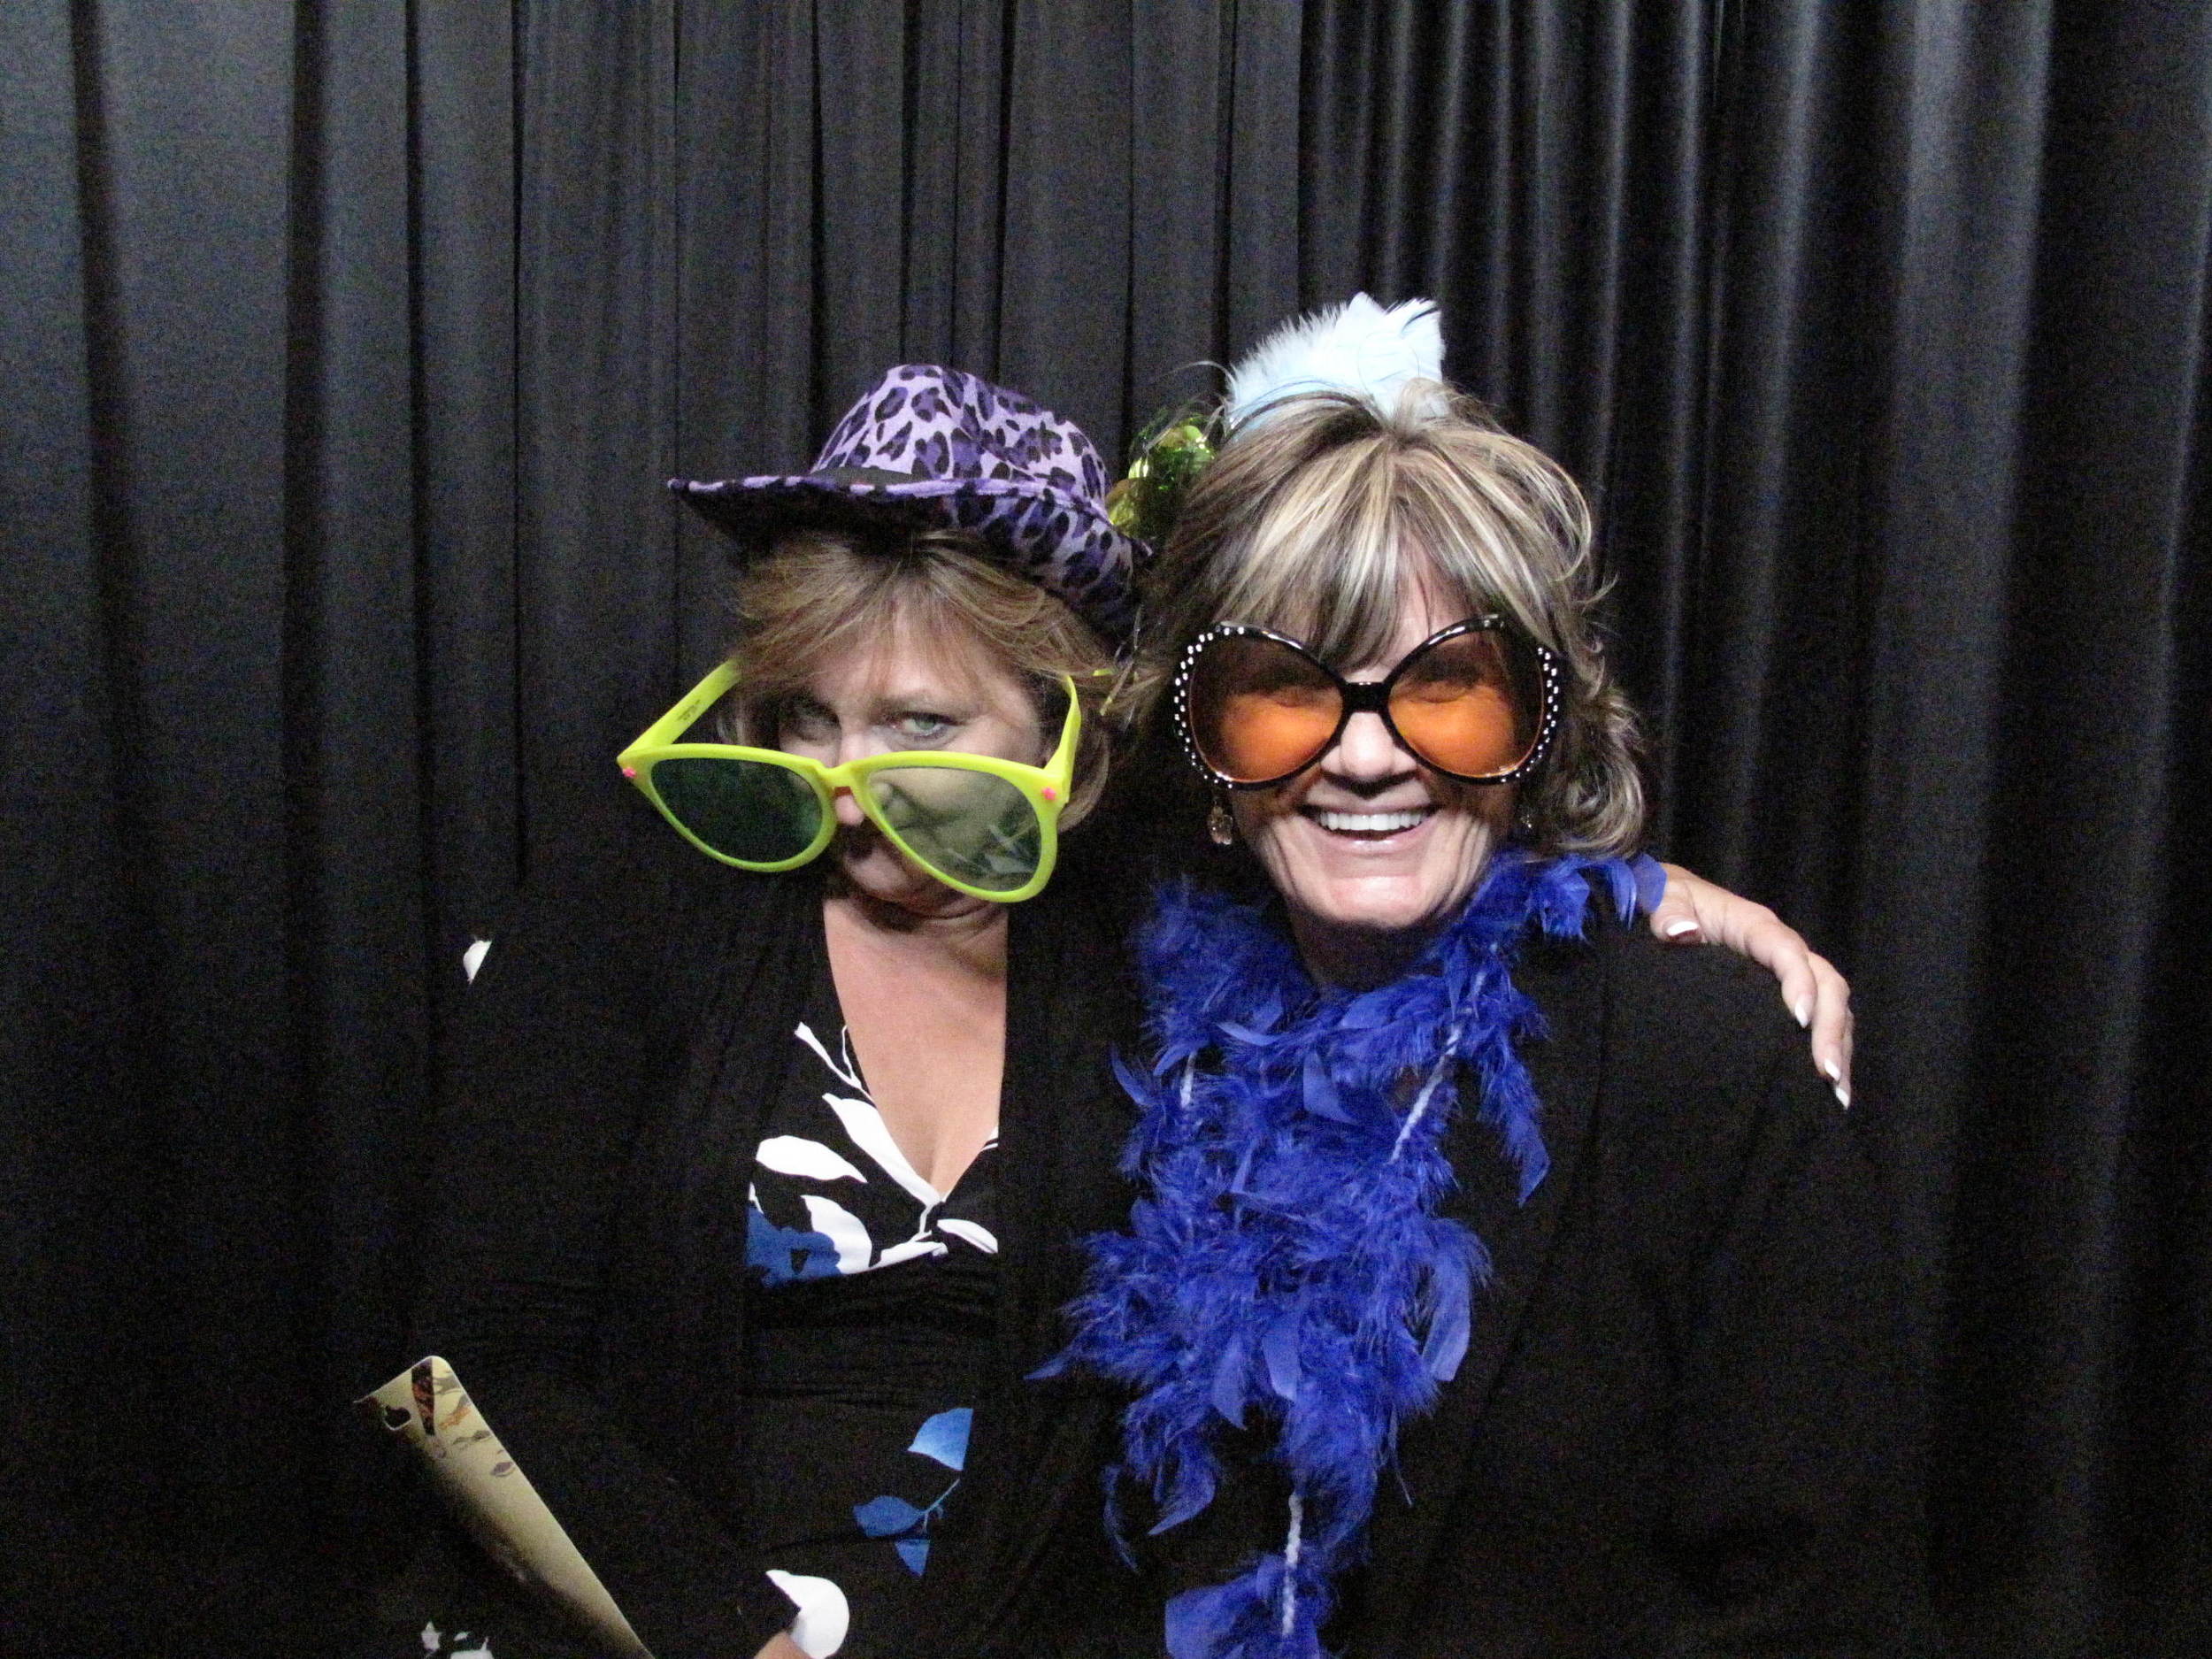 Snapshot Photobooths at the Doubltree in Tinton Falls, New Jersey